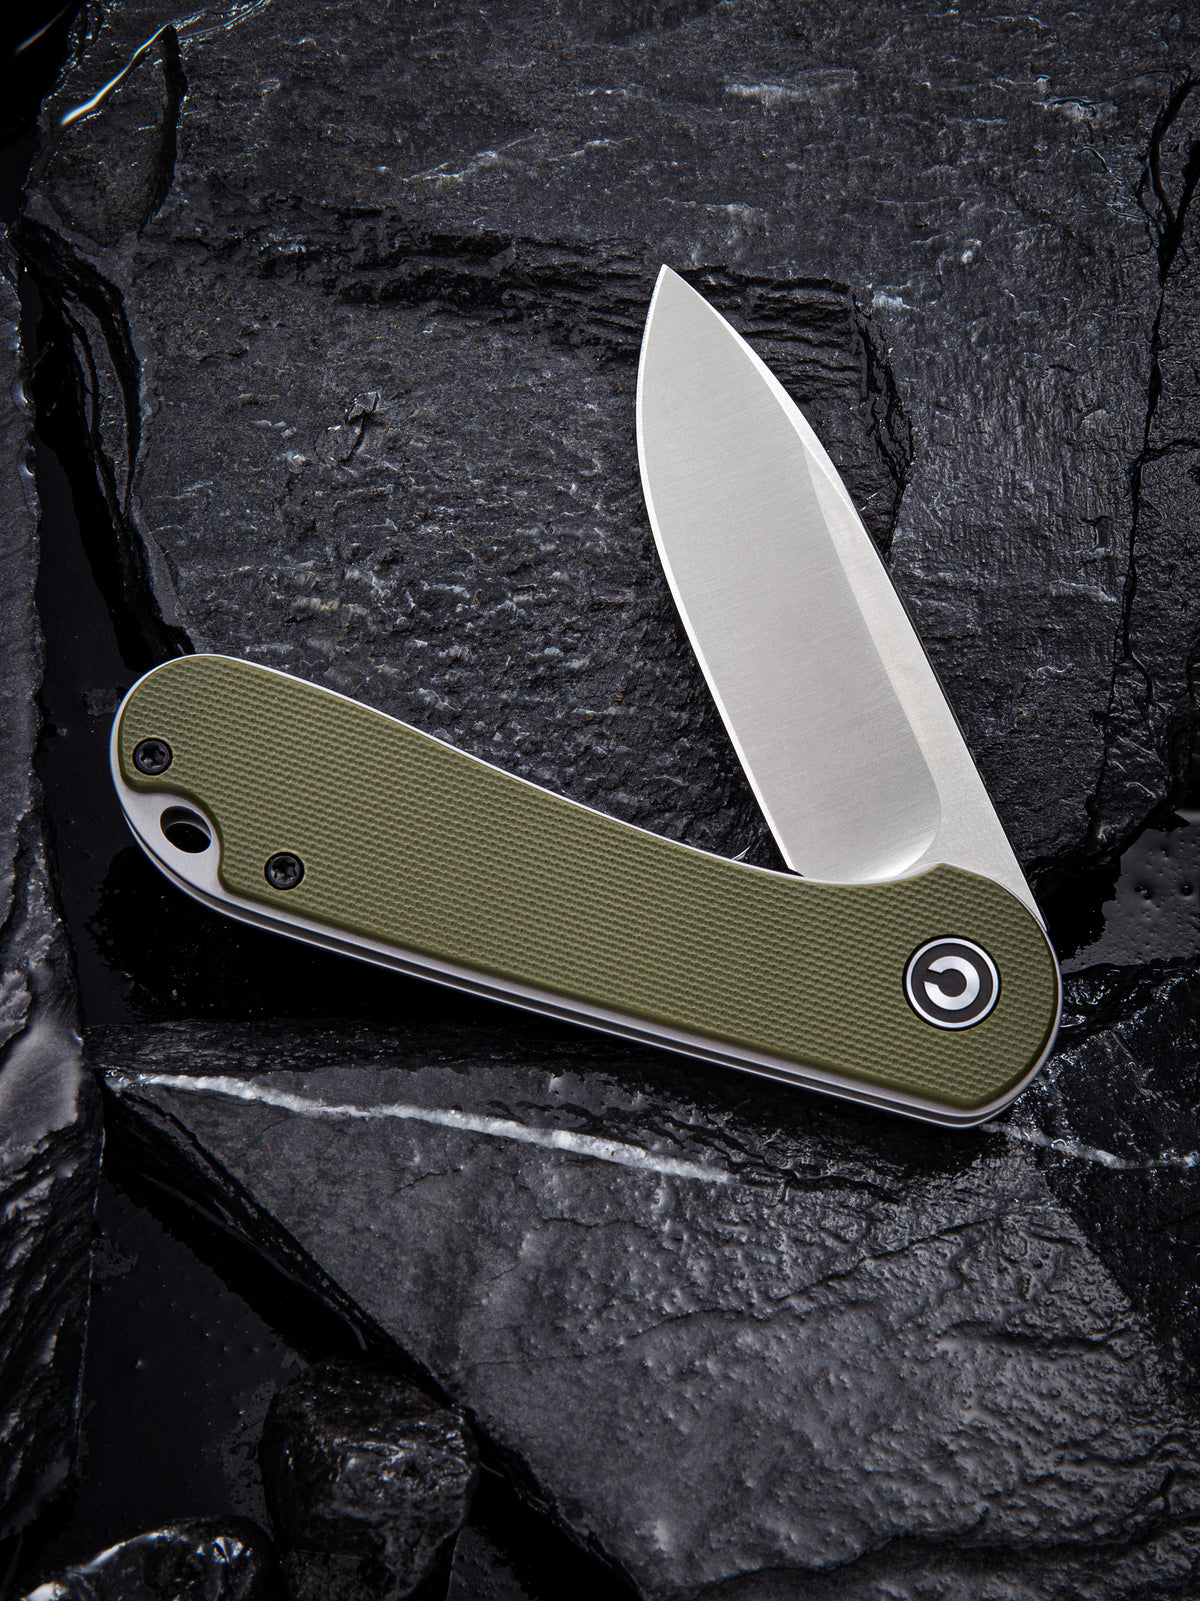 CIVIVI Elementum | Green G10 Handle Gray S/S Liner Satin Finished D2